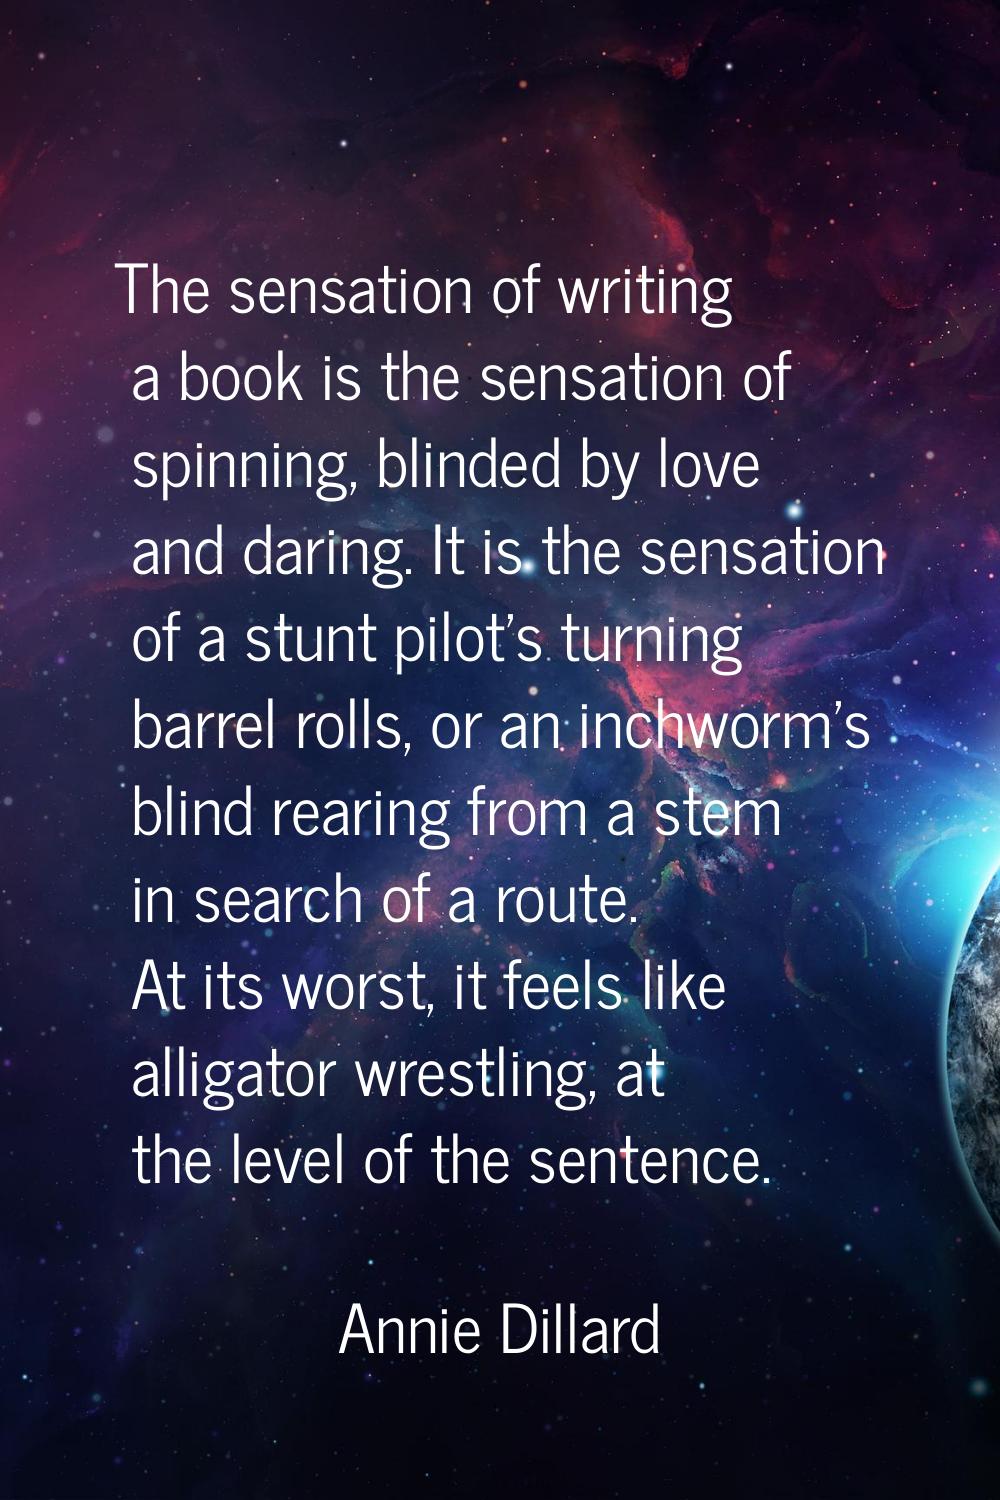 The sensation of writing a book is the sensation of spinning, blinded by love and daring. It is the